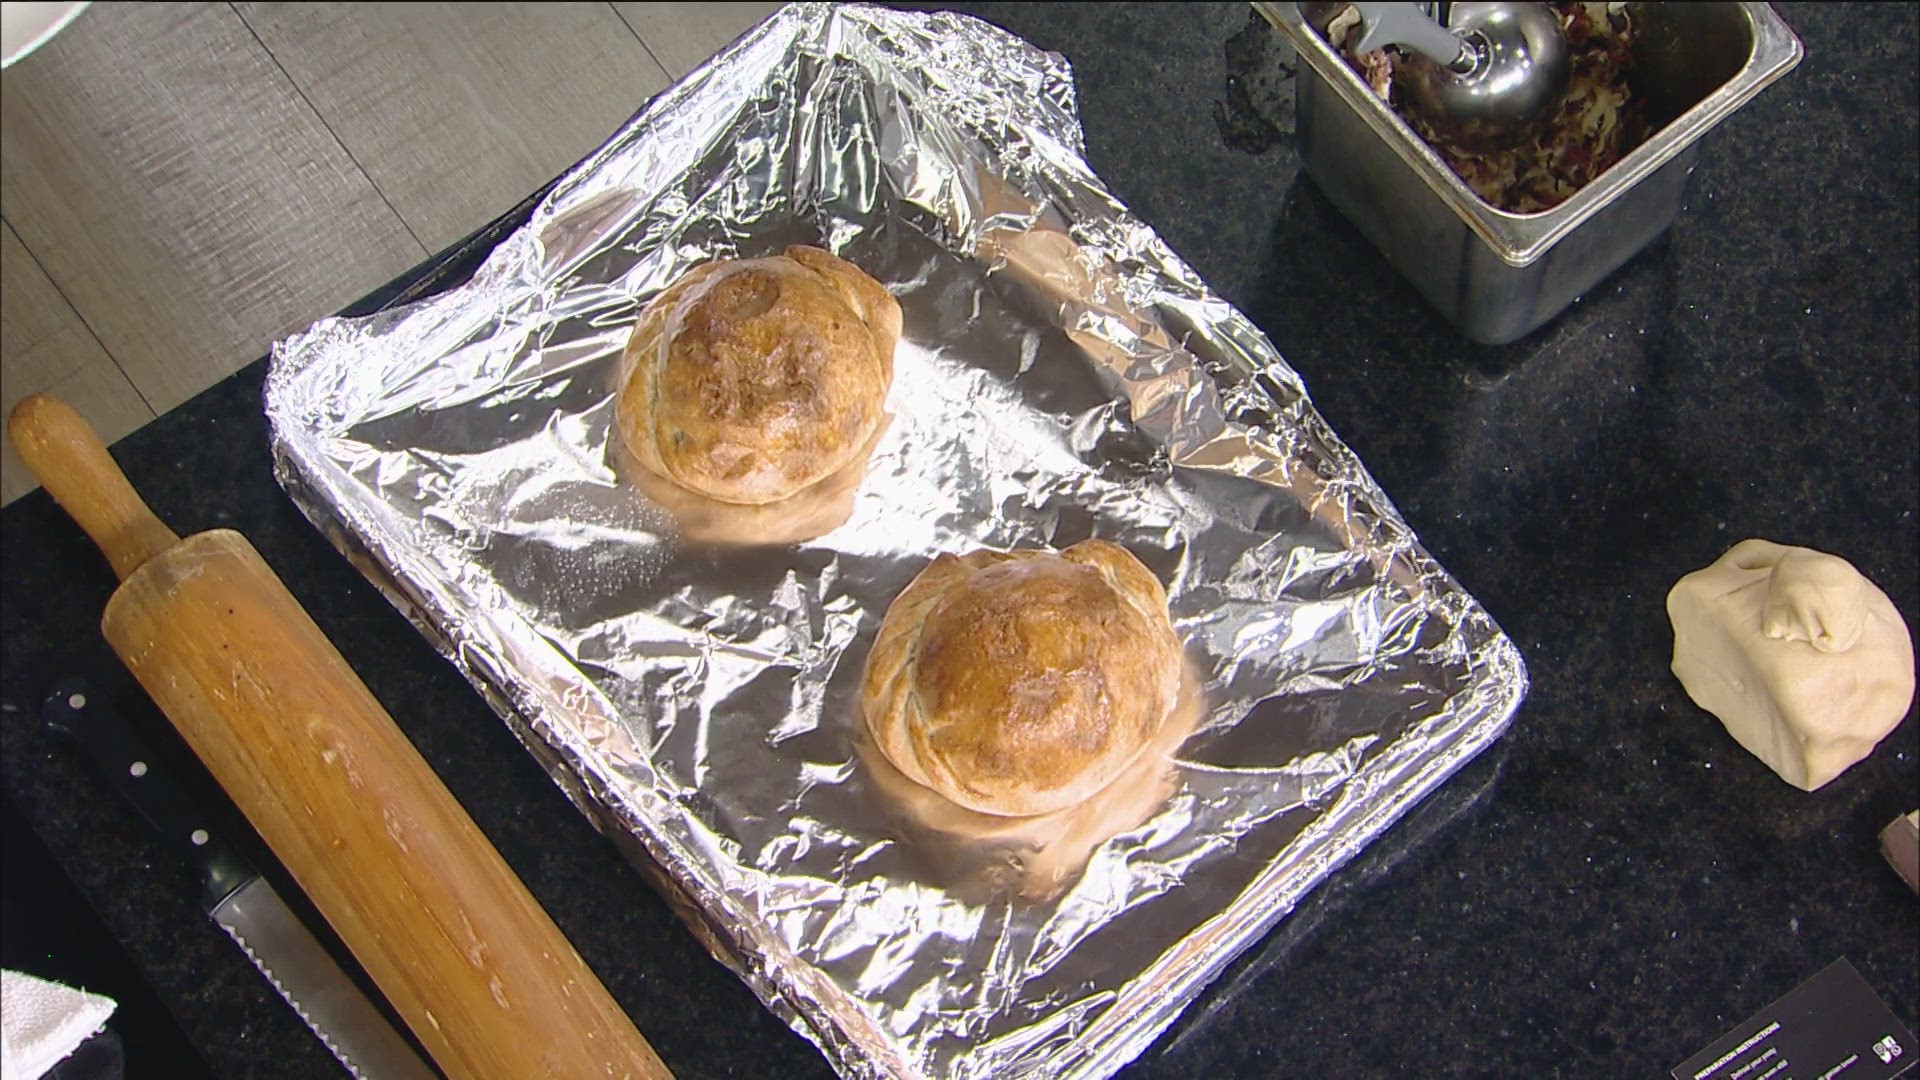 Alec Duncan, the creator of Potter's Pasties & Pies,  joined KARE 11 Saturday to share their Reuben Pasty recipe.